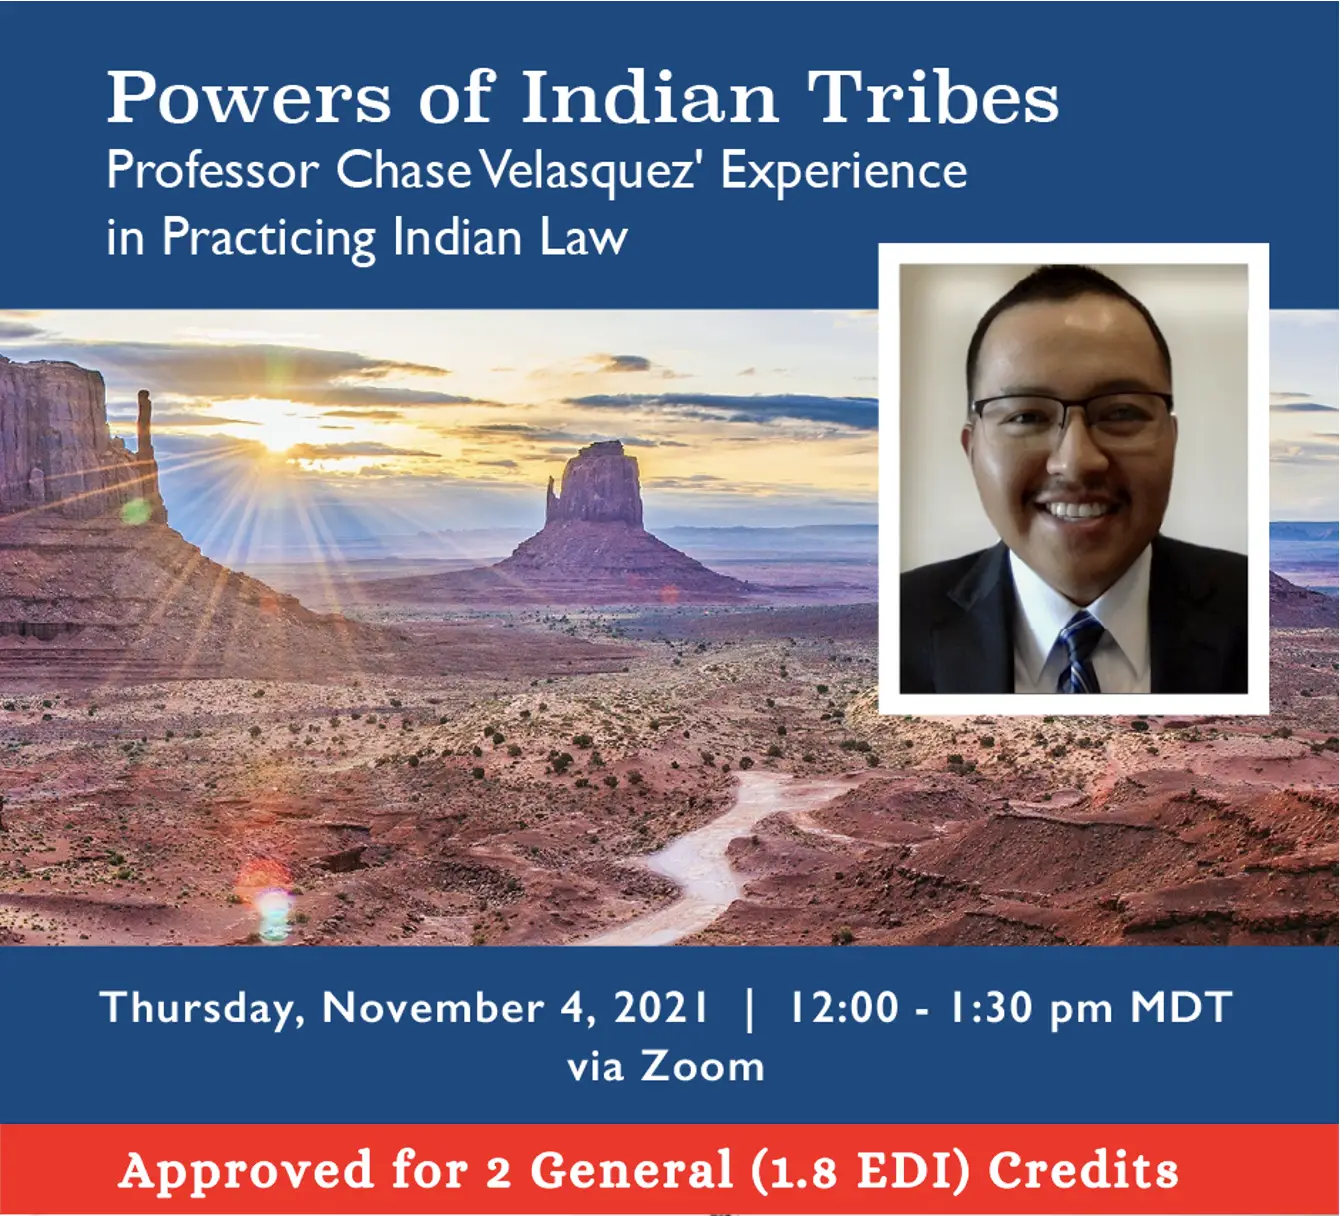 Powers of Indian Tribes: Professor Chase Velasquez’ Experience in Practicing Indian Law